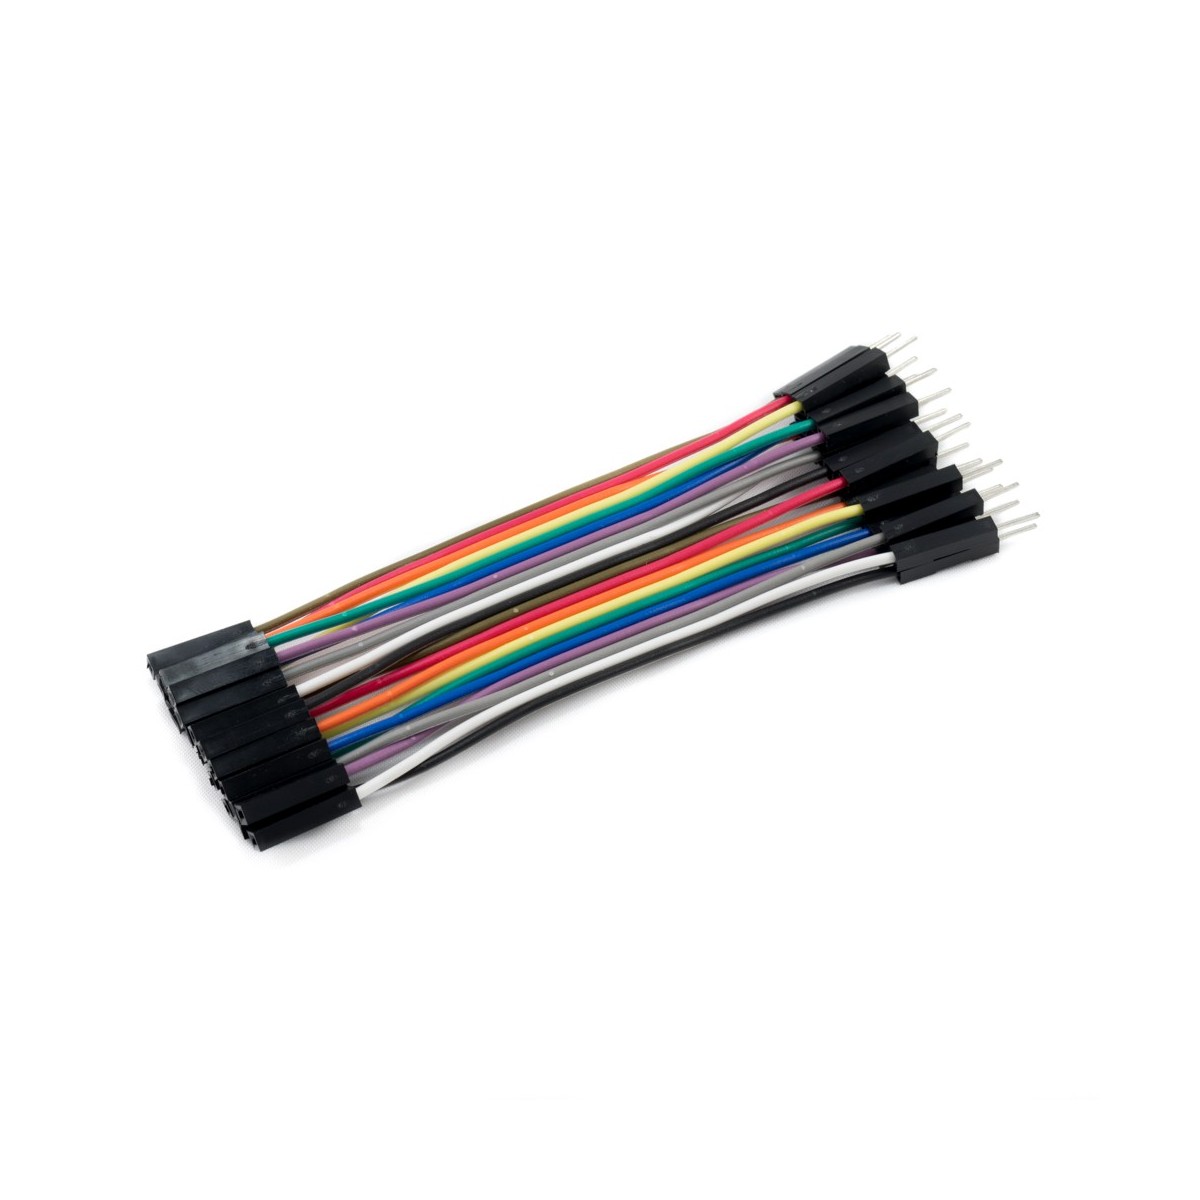 Cable Dupont a 10cm / 20Und